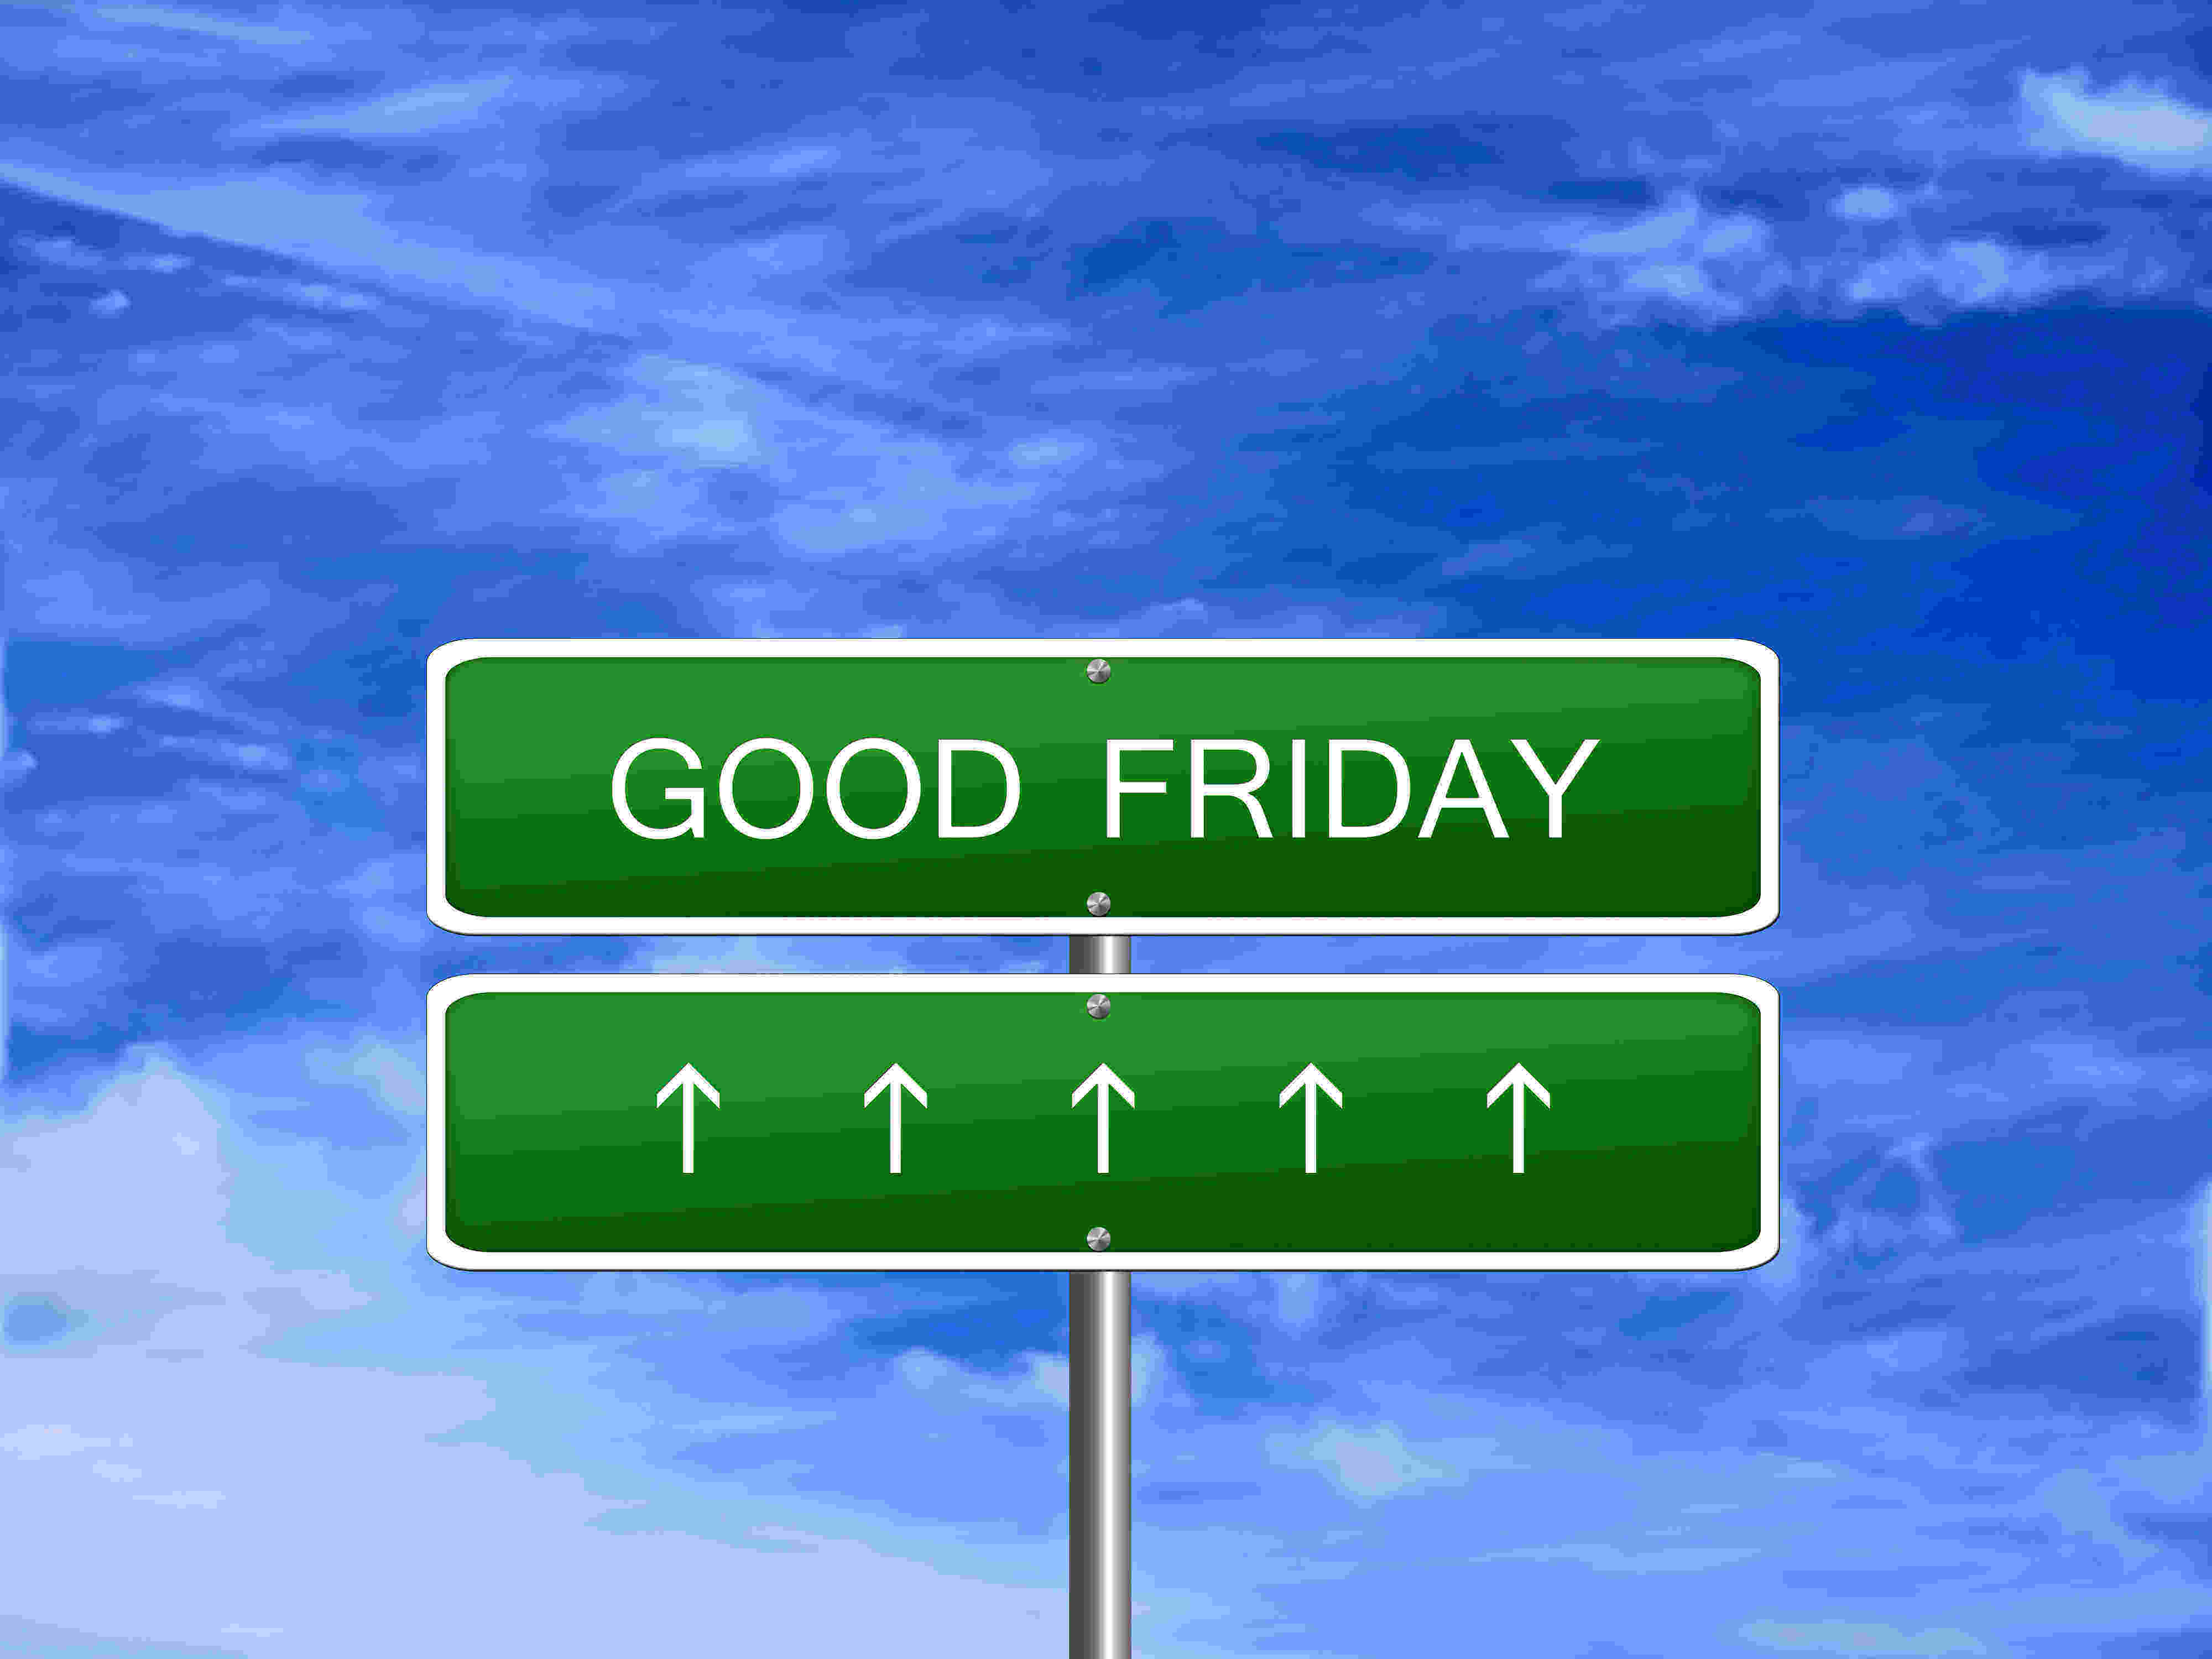 Most of the 110 premises presently applying for a SEO are doing so in relation to Good Friday.